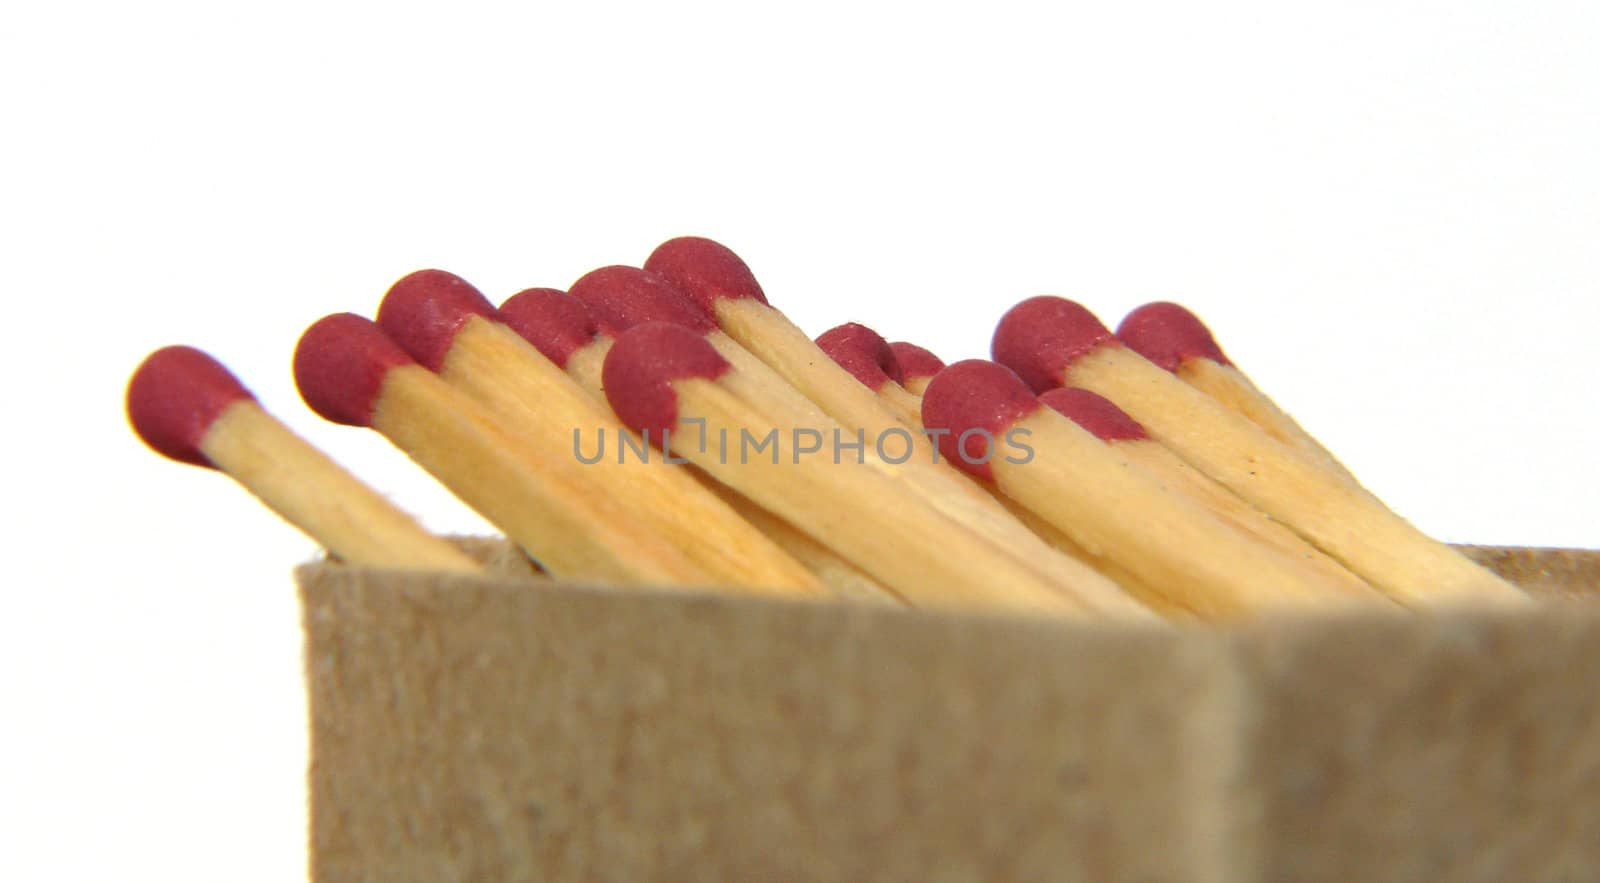 Matches in box. Extreme close-up on white background.